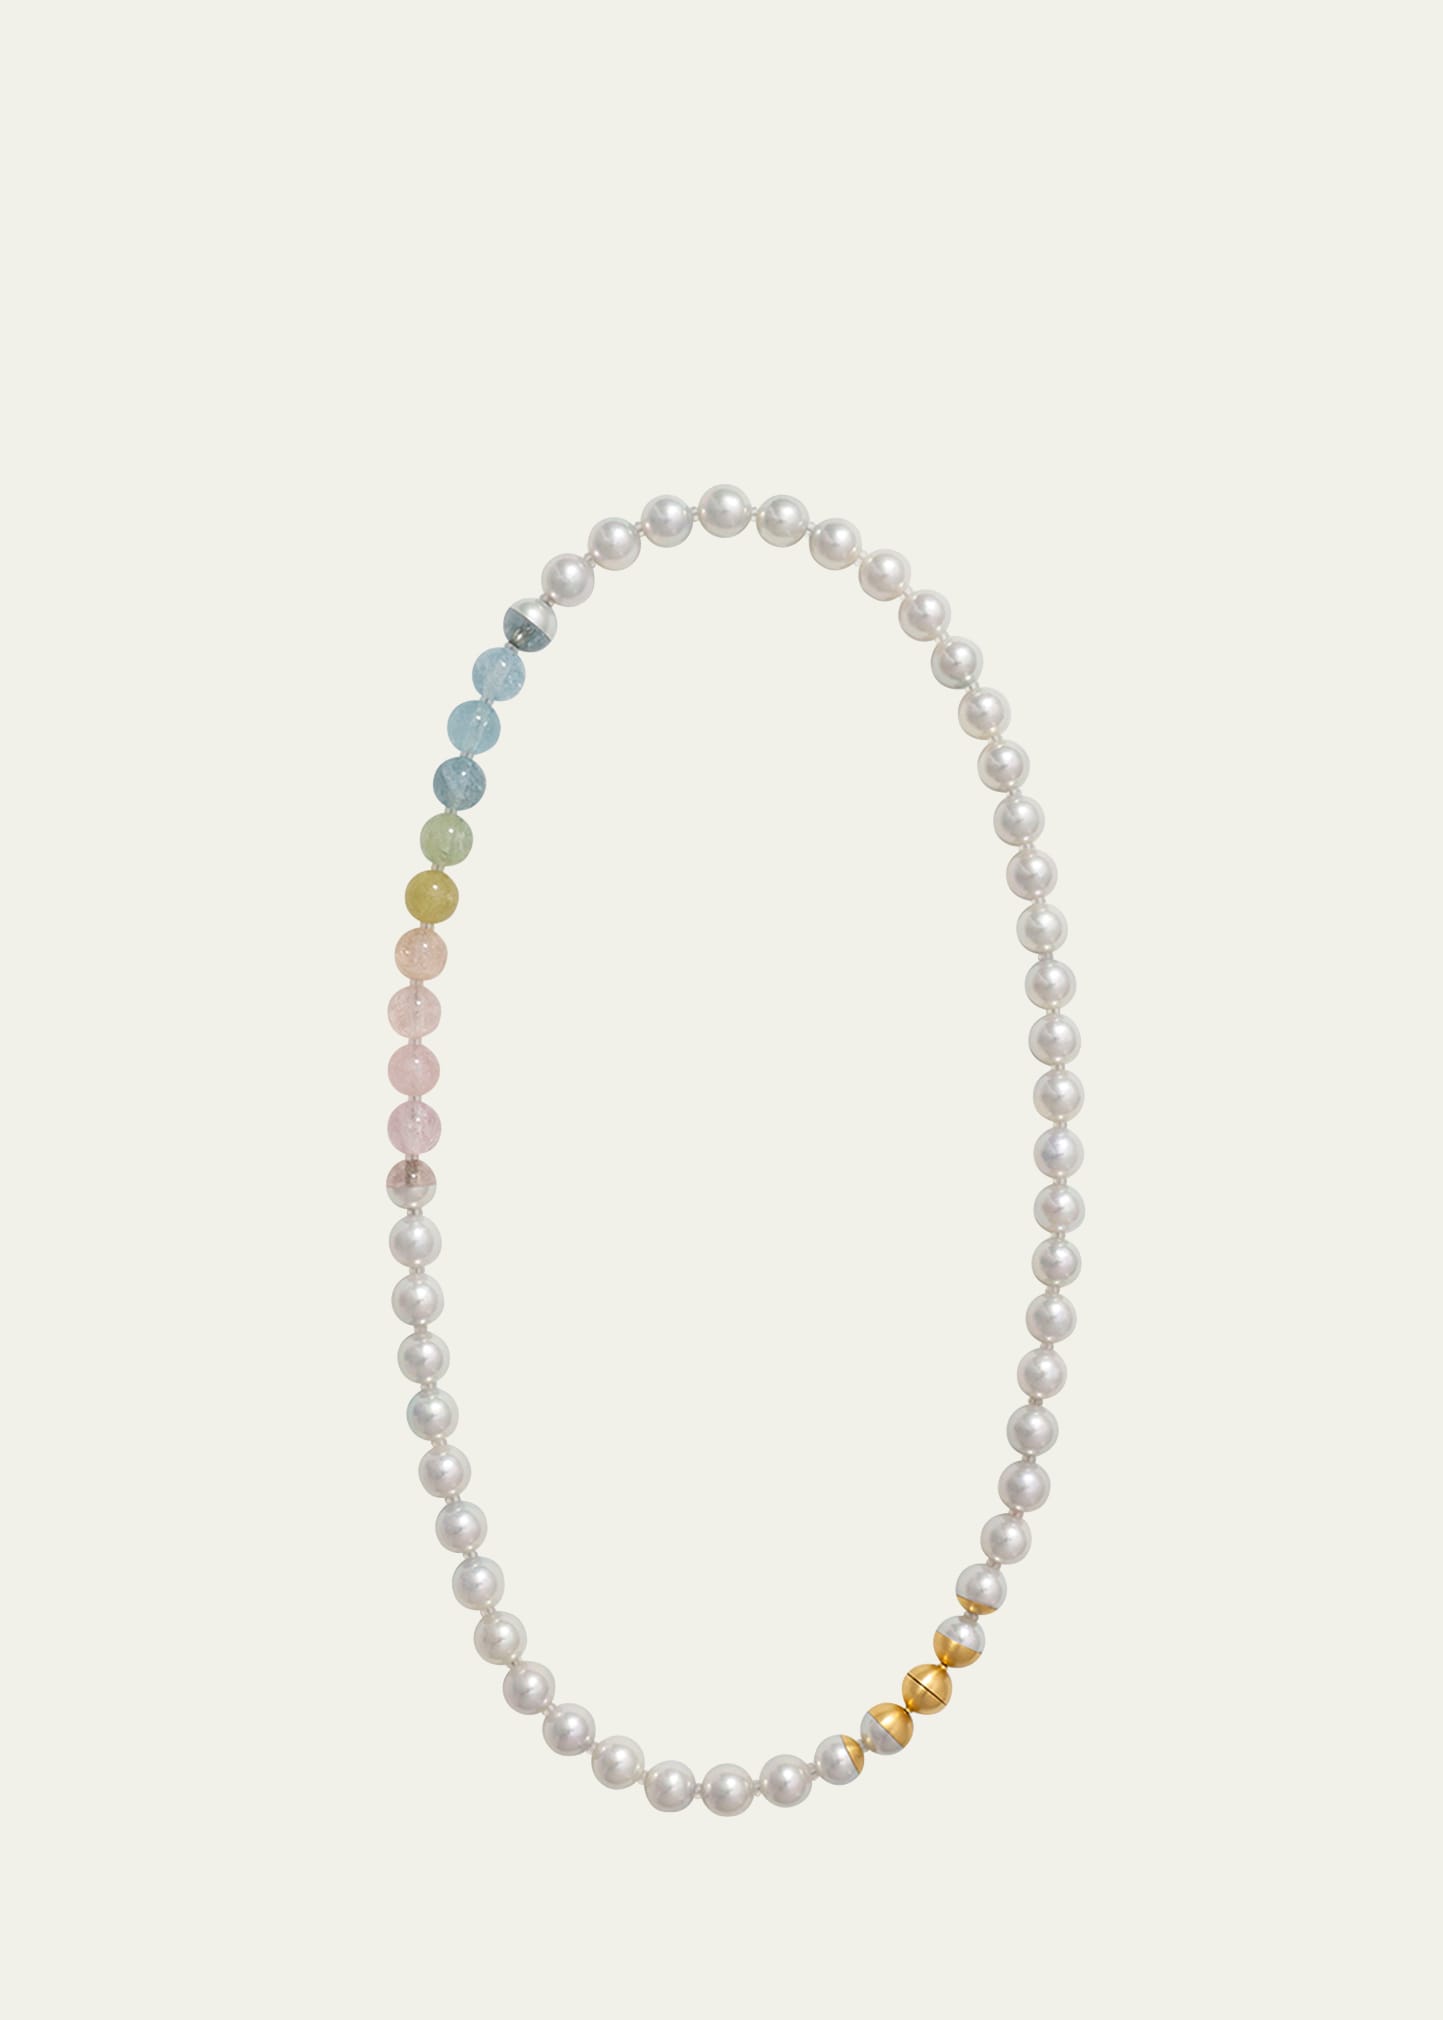 Yutai 18k Yellow Gold Sectional Pearl Necklace With Cultured Akoya Pearls And Mixed Beryl In Multi Beryl